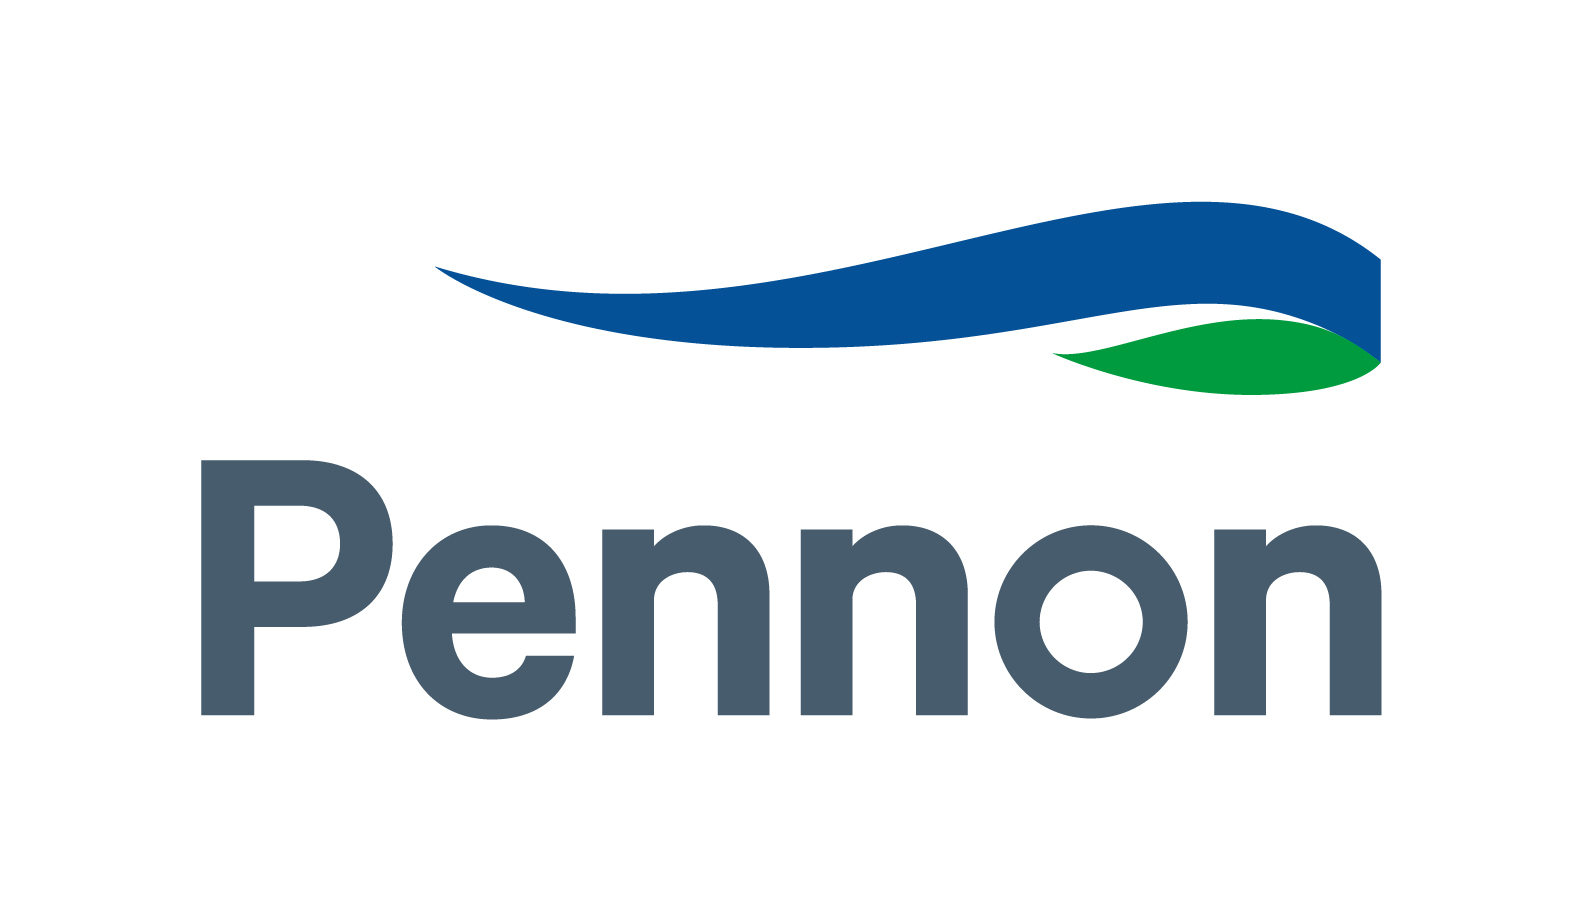 Exeter based Pennon Group’s results show continued support for the South West and communities across the region